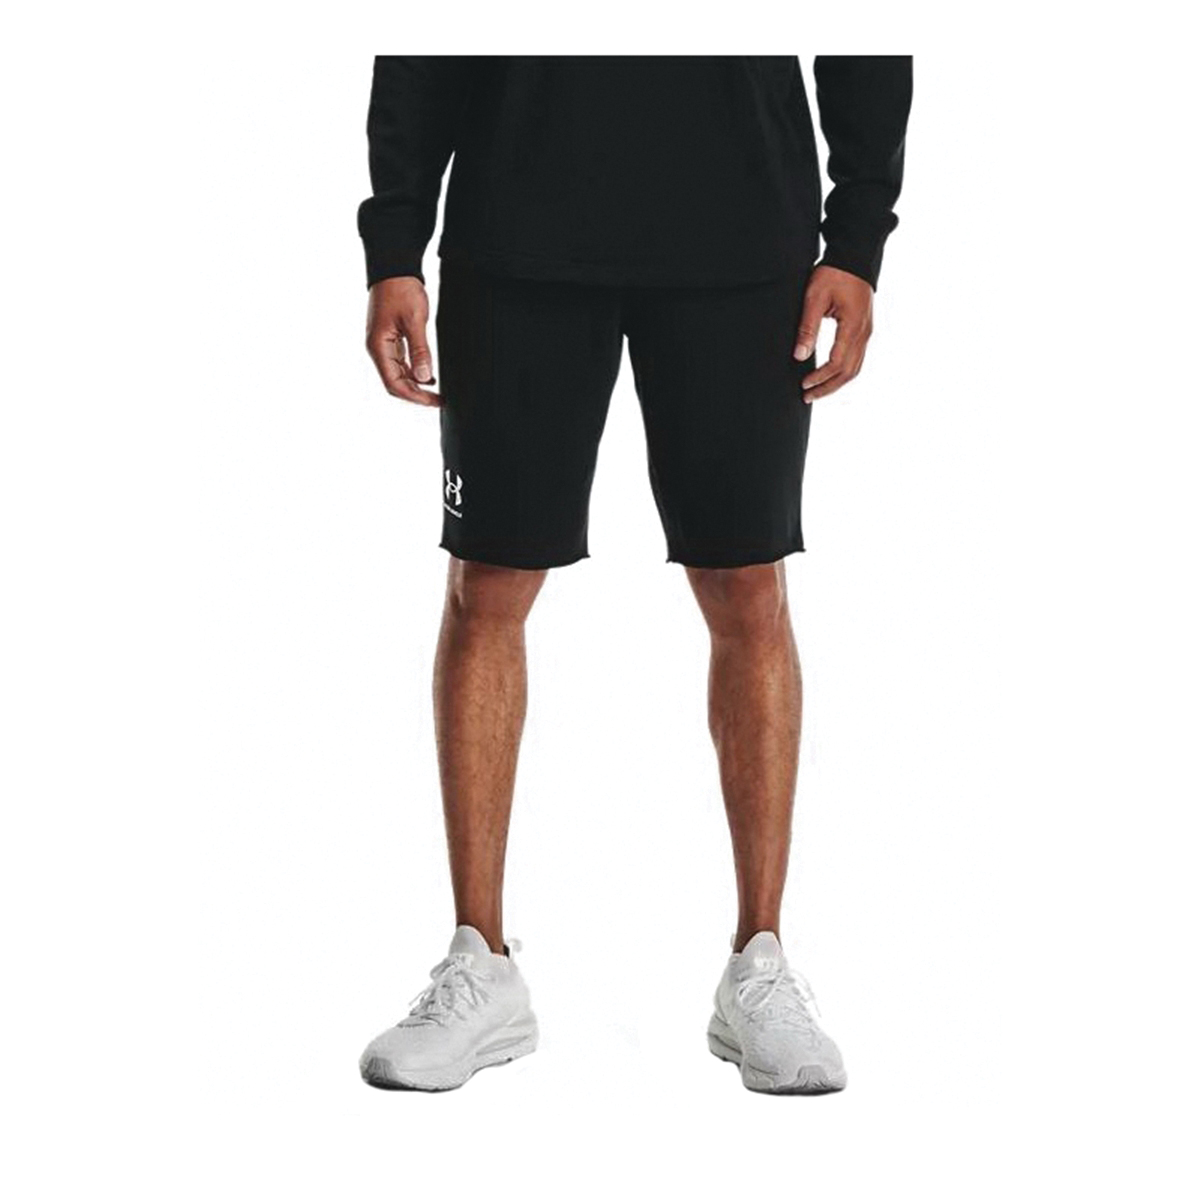 Under Armour Rival Terry Series 1361631-001-XL Shorts, XL, Cotton/Polyester, Black/Onyx White, Streamlined, Regular - 1